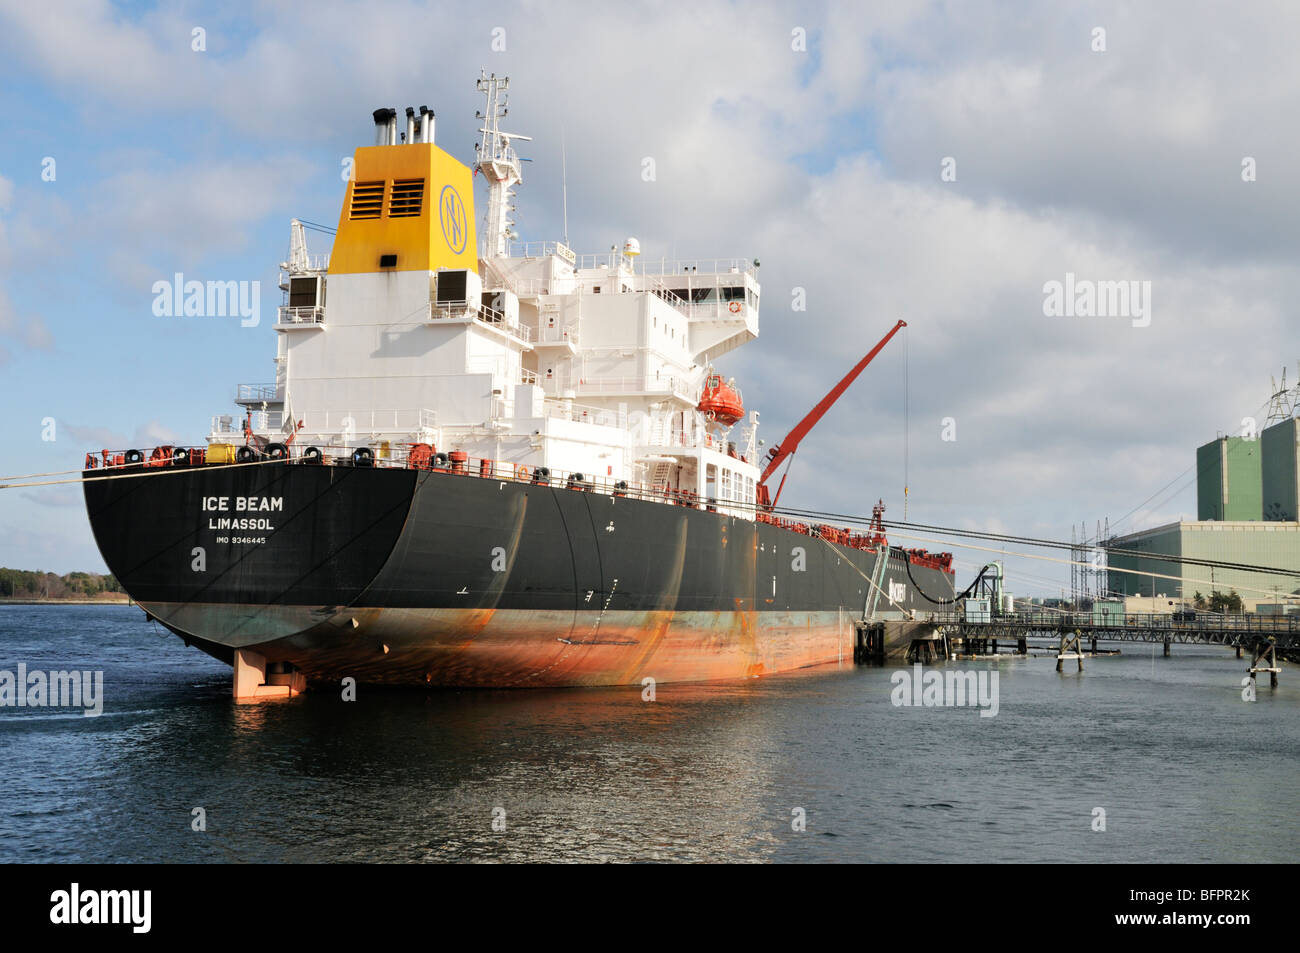 Crude oil tanker, Ice Beam, tied up to pier at Mirant Power Plant in the Cape Cod Canal to offload oil Stock Photo